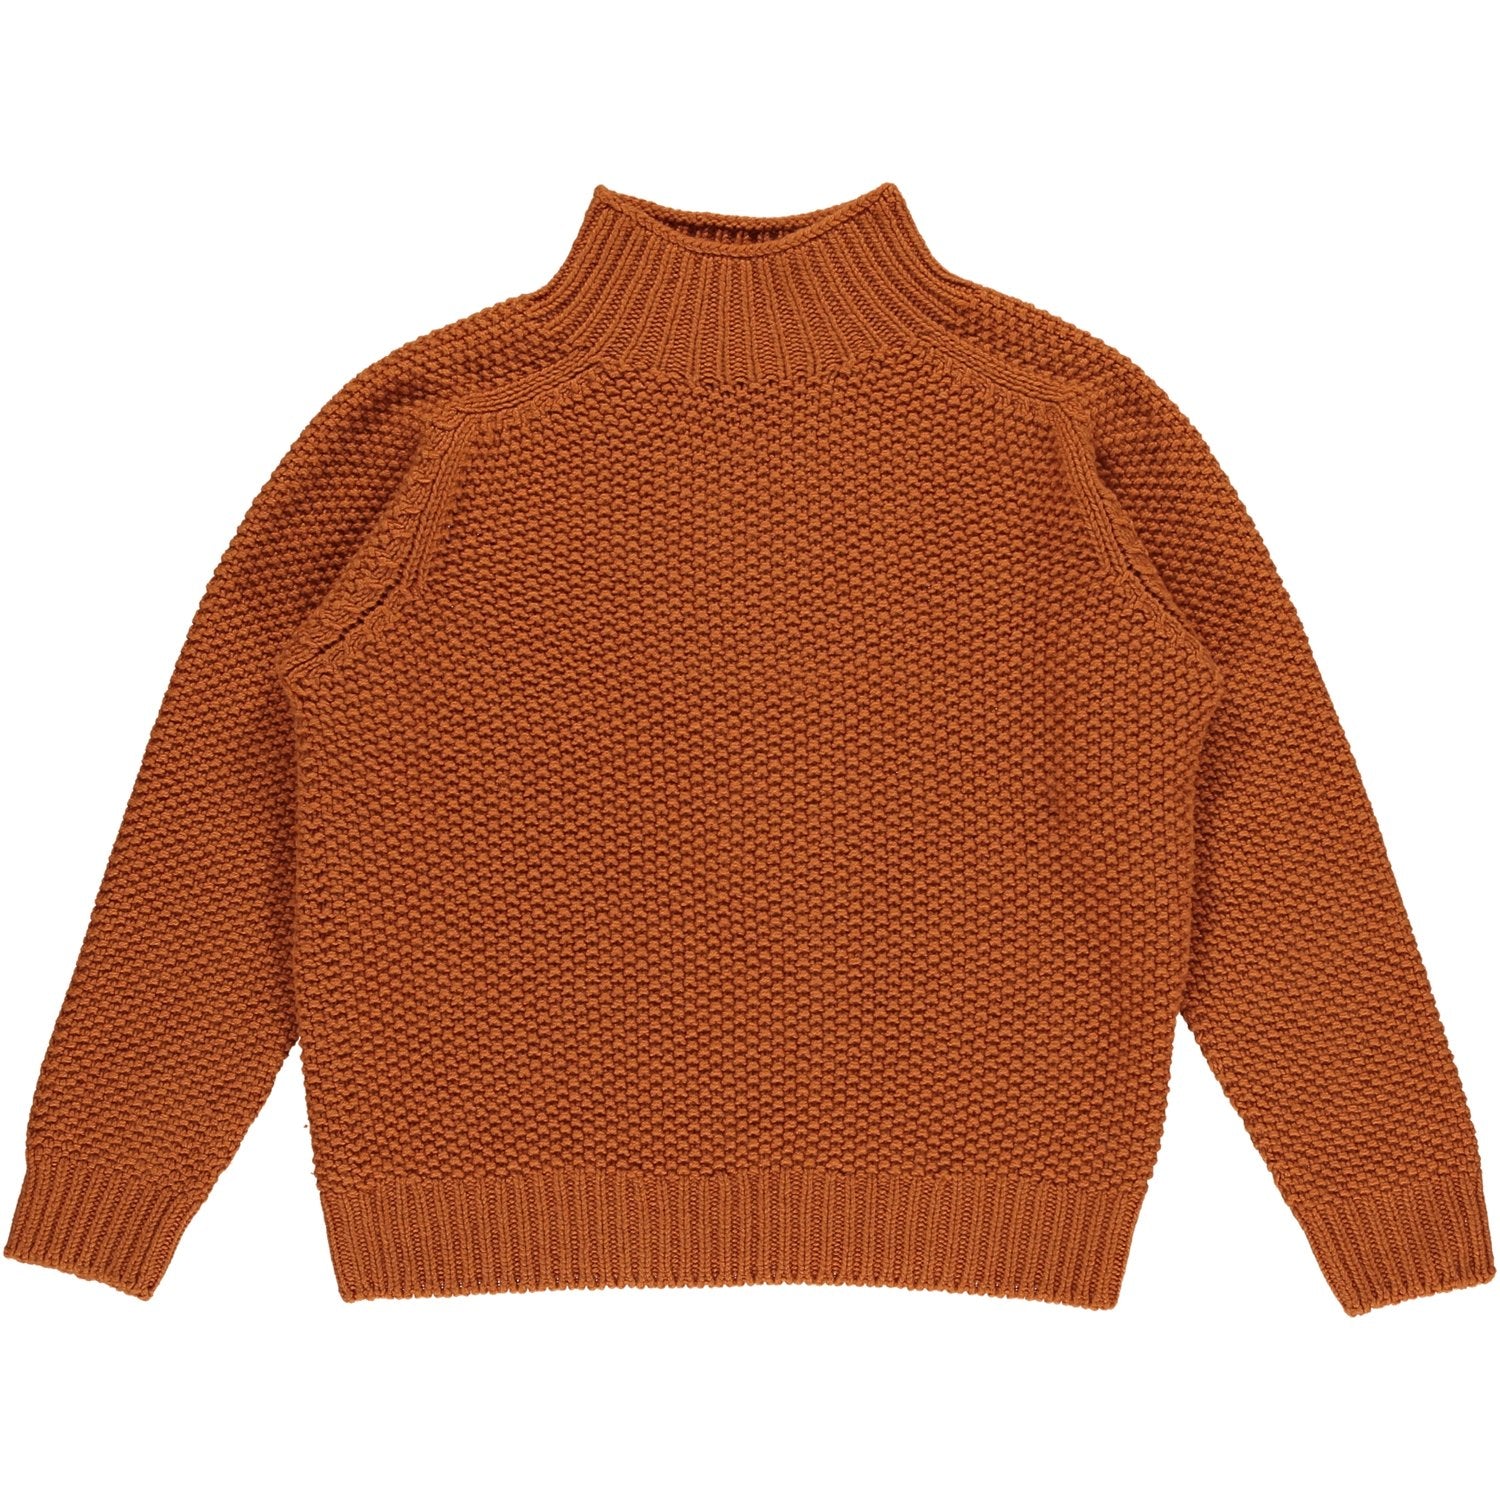 Quinton + Chadwick Moss Sweater - Ginger